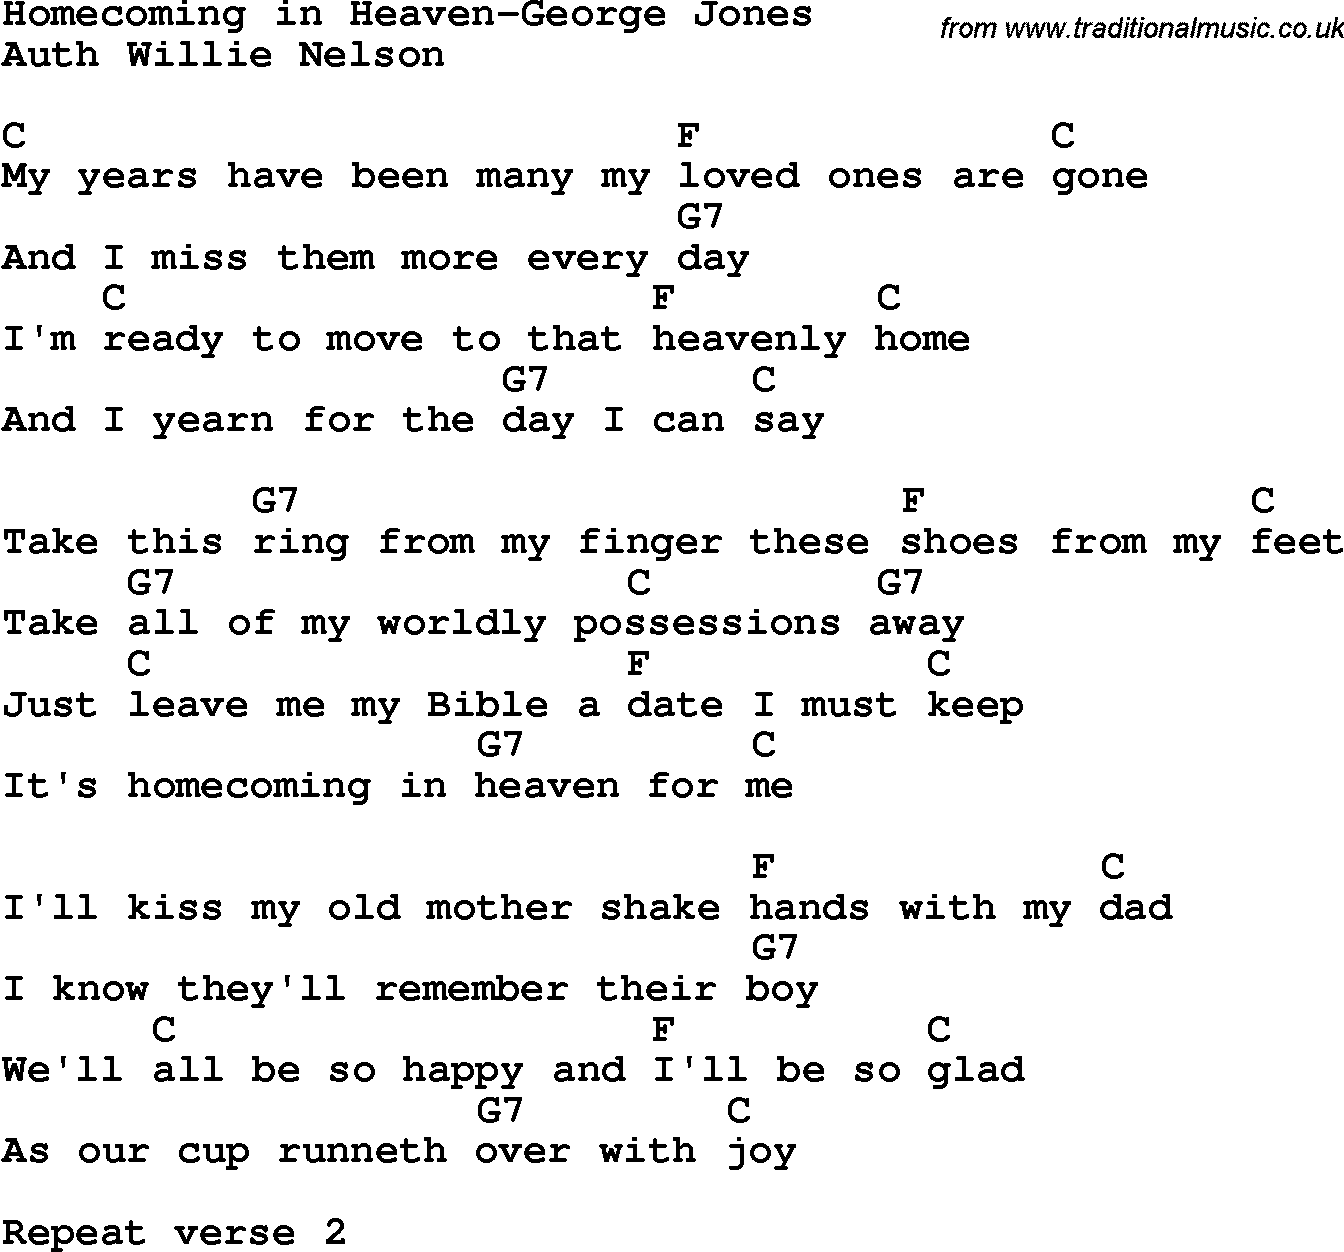 Country, Southern and Bluegrass Gospel Song Homecoming in Heaven-George Jones lyrics and chords